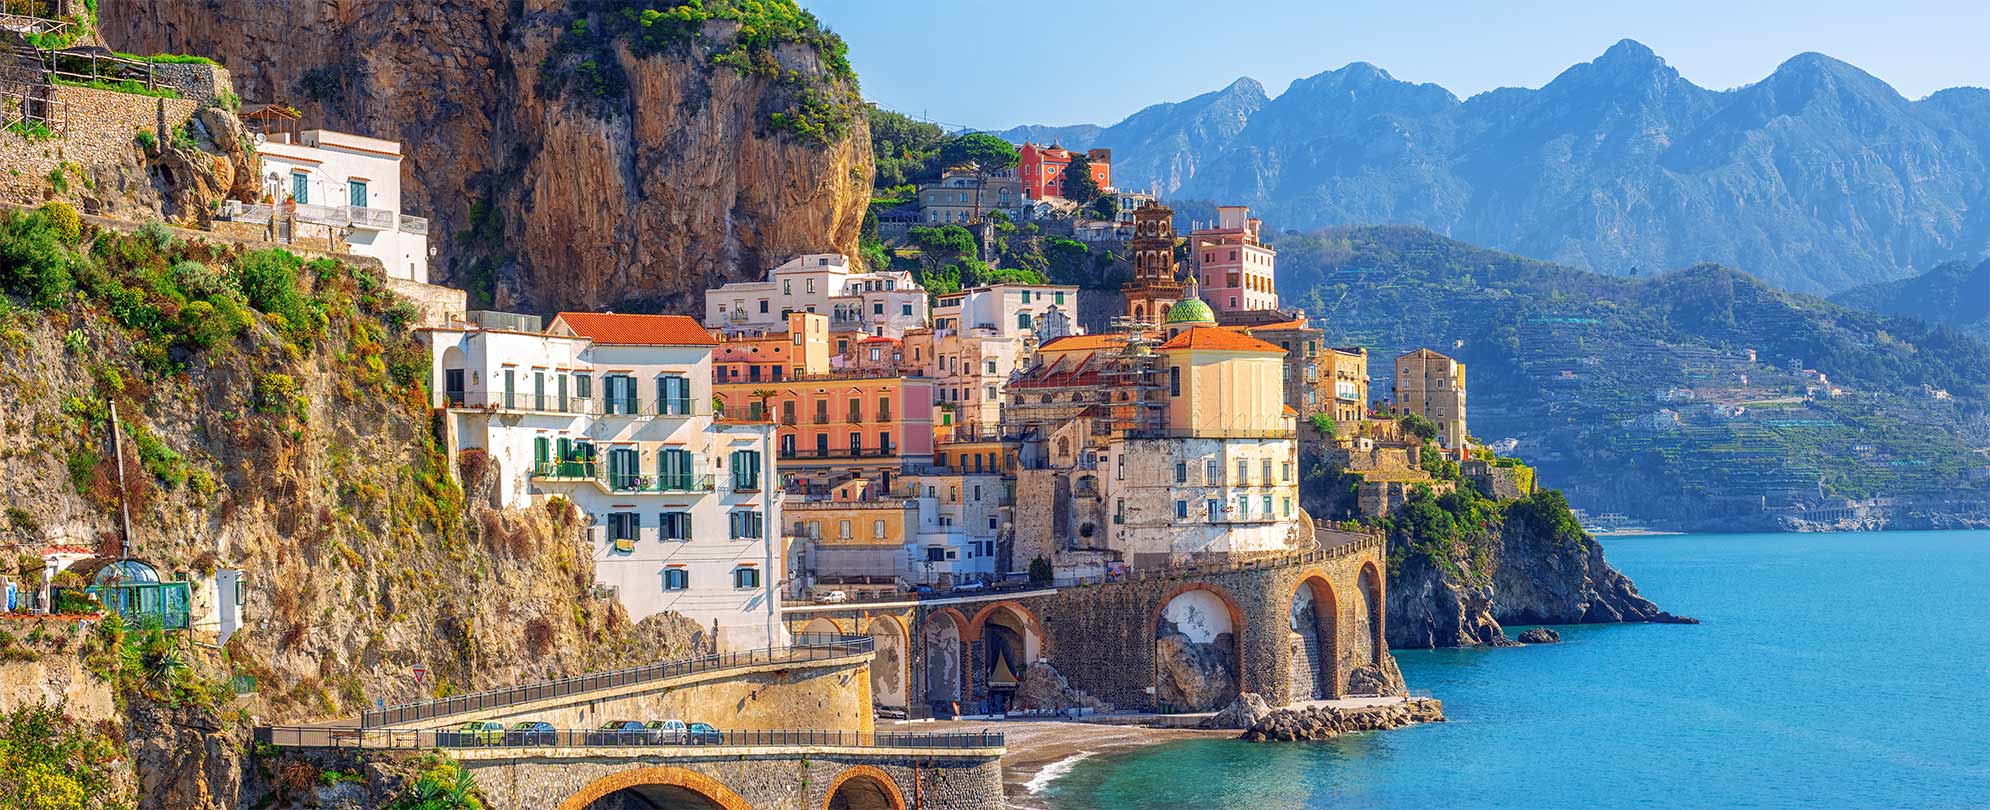 The Amalfi Coast in Southern Italy with buildings in a mountainside, ocean, and a winding coastal road.